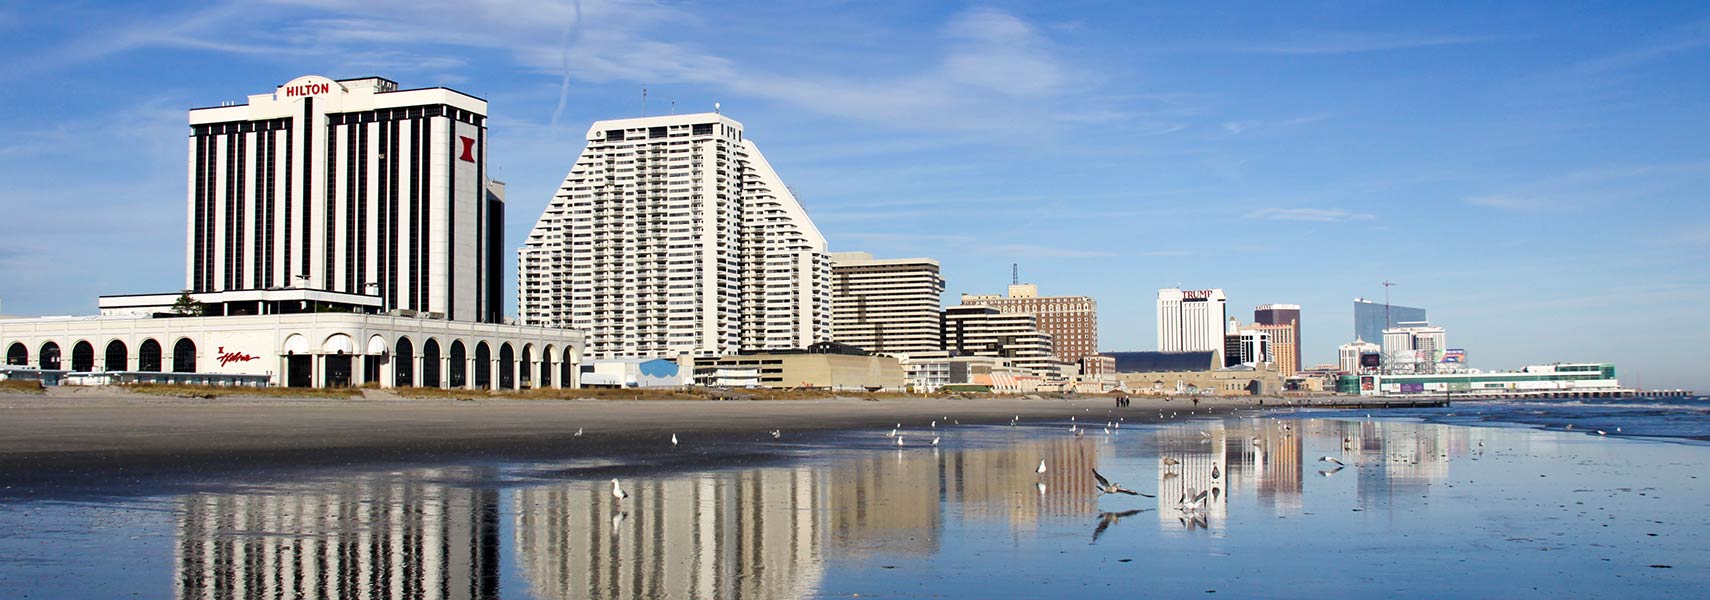 map of atlantic city hotels and casinos